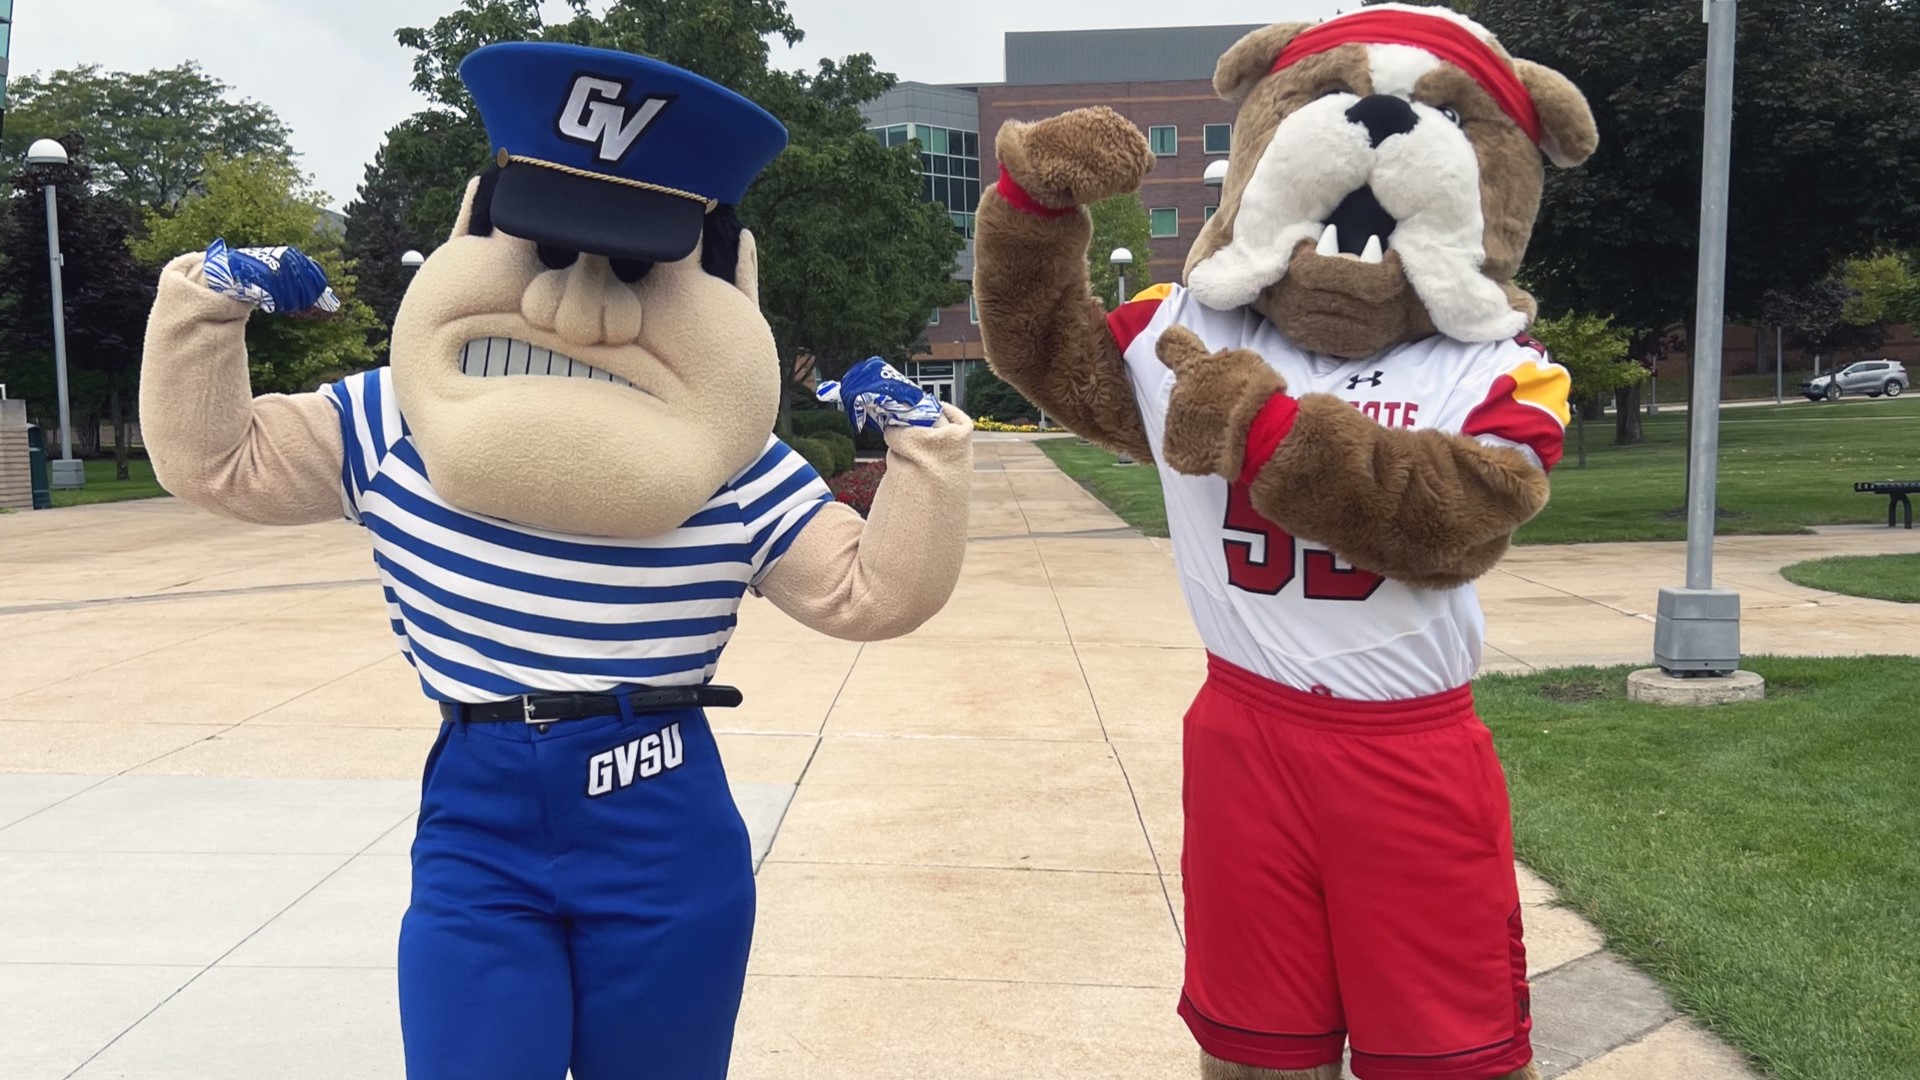 While Ferris State University and Grand Valley State University are rivals on the football field, leaders from both schools are urging respect and sportsmanship.